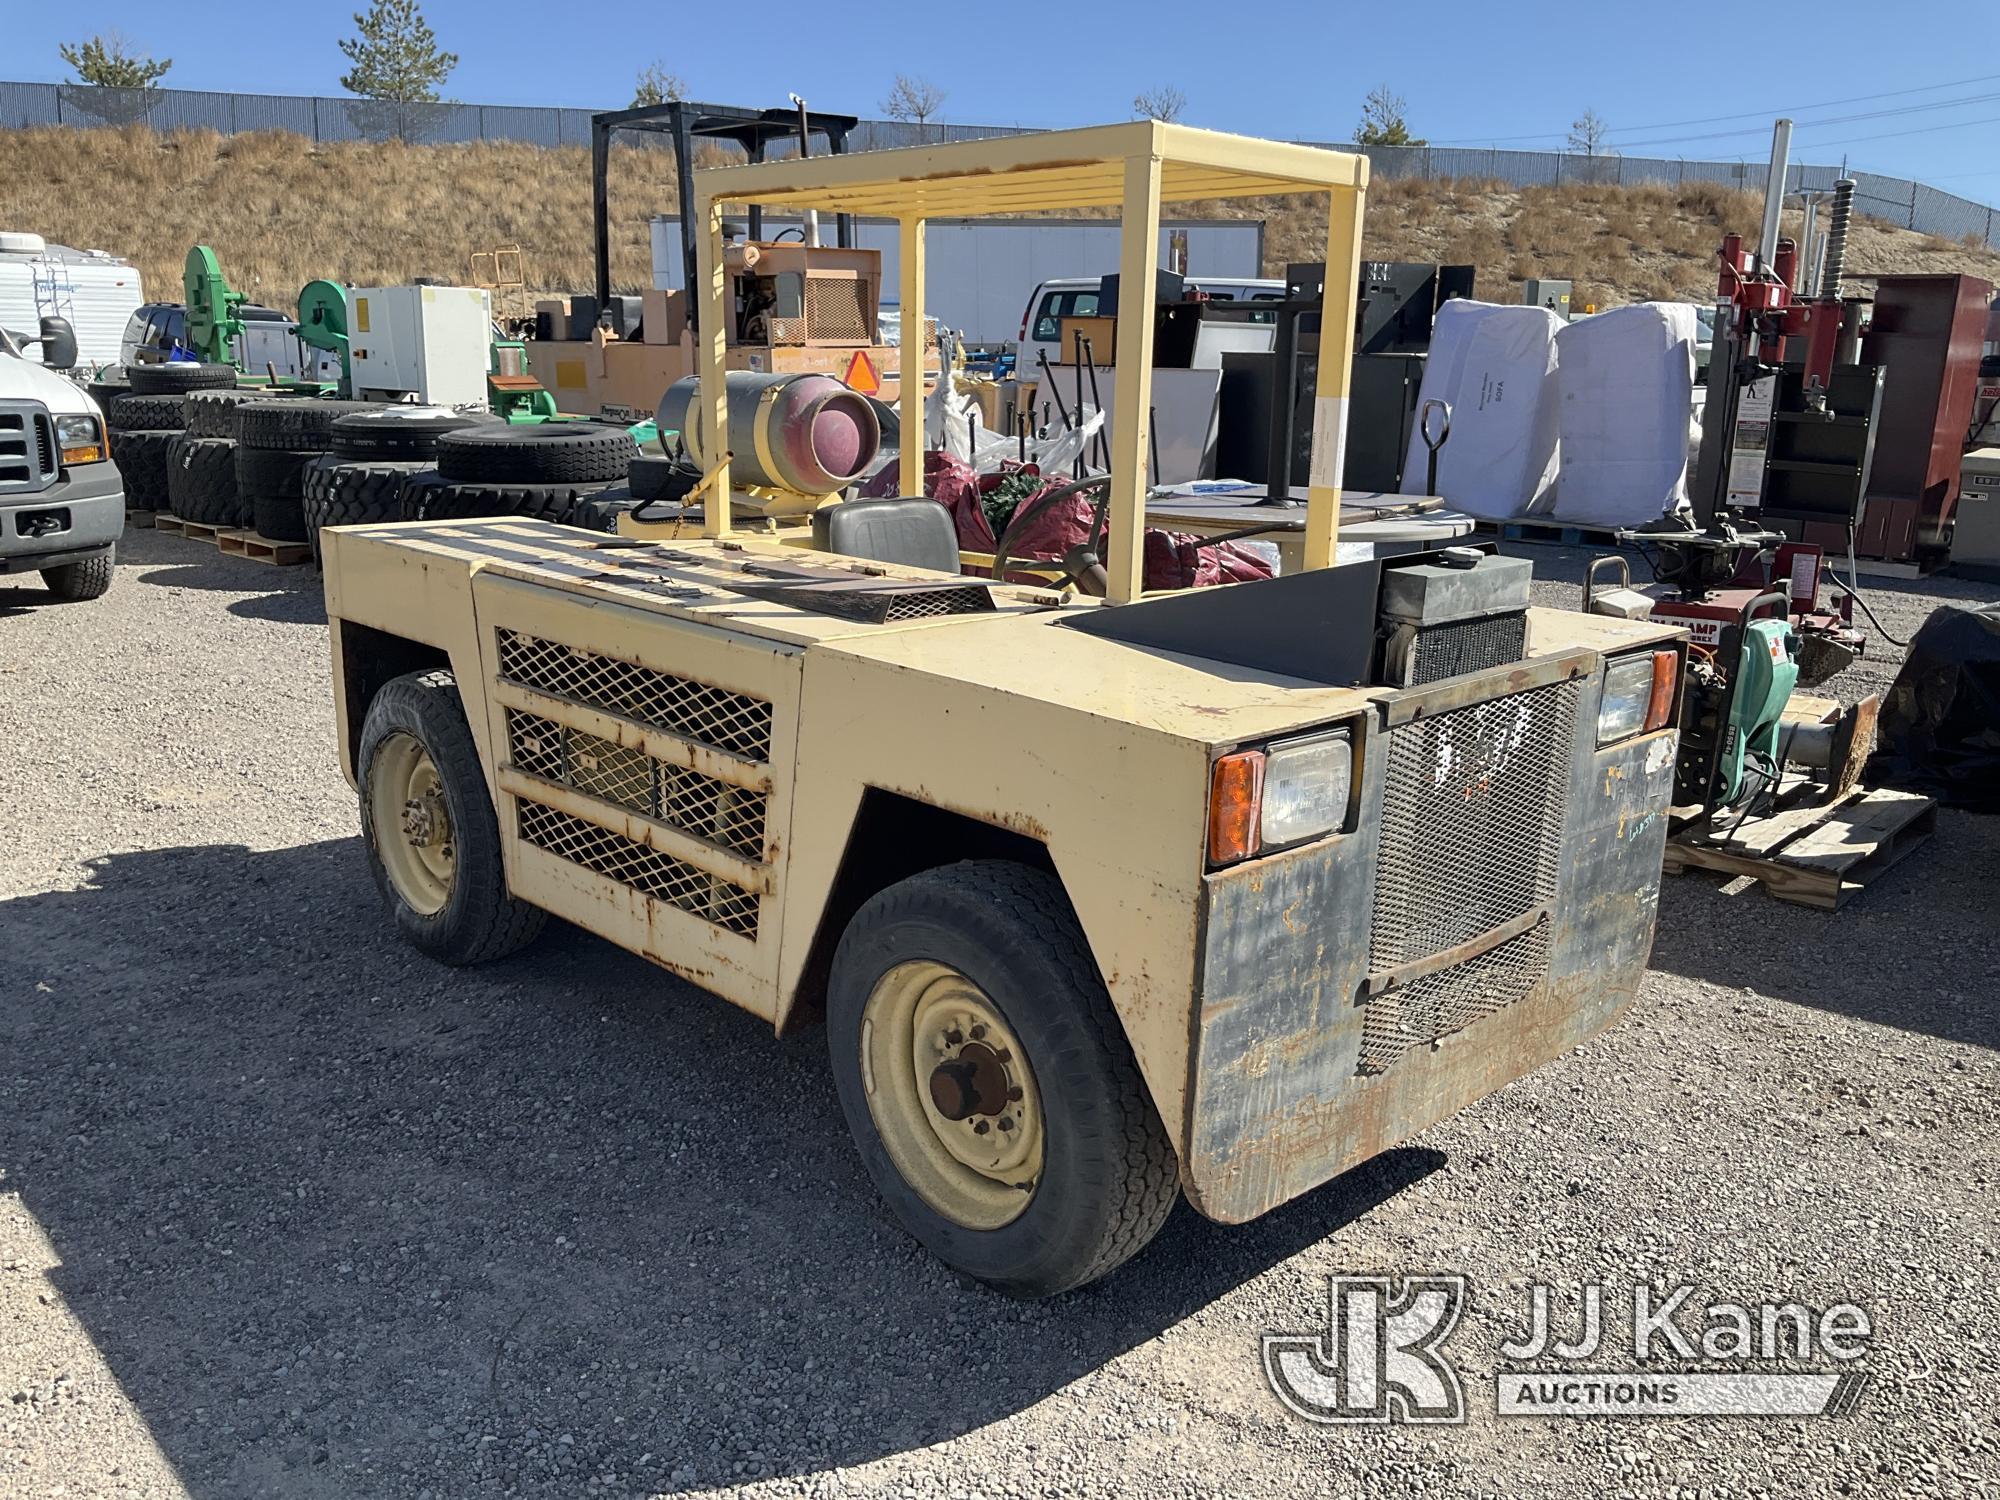 (McCarran, NV) 1991 Eagle Tug Located In Reno Nv. Contact Nathan Tiedt To Preview 775-240-1030 Runs